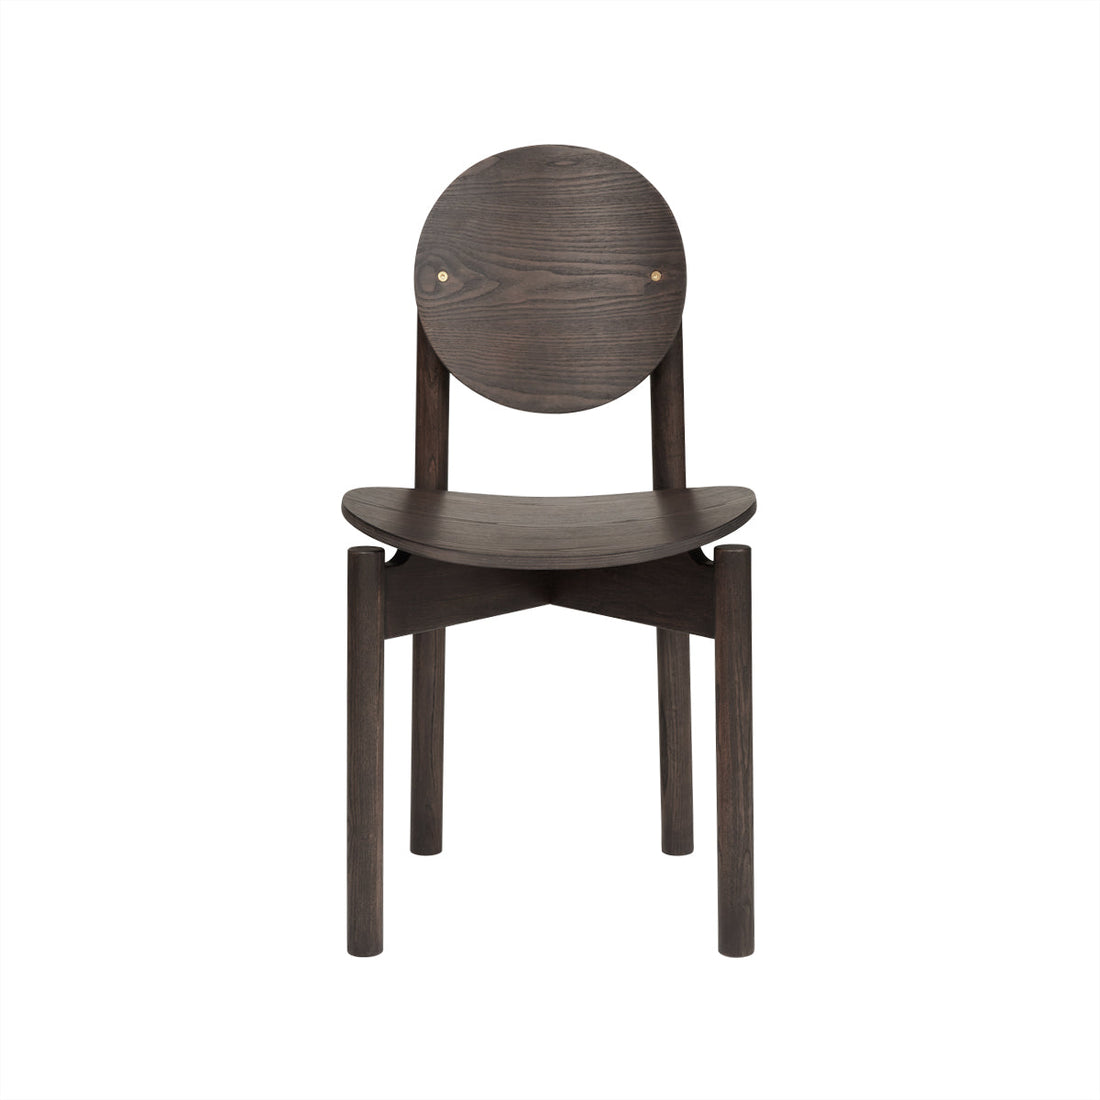 Oyoy Living Oy Dining Table Chair